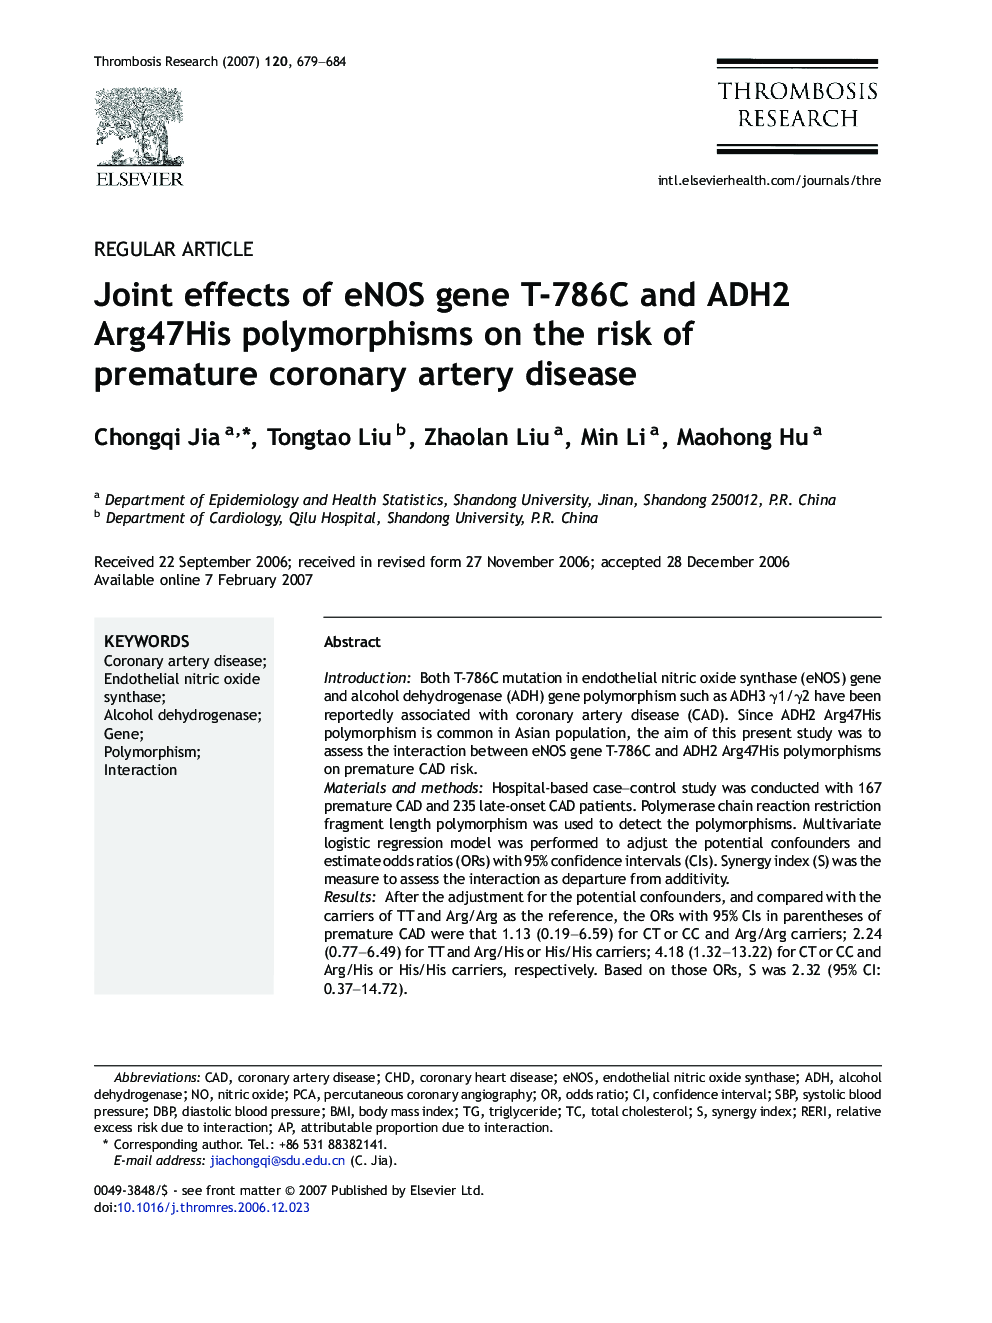 Joint effects of eNOS gene T-786C and ADH2 Arg47His polymorphisms on the risk of premature coronary artery disease